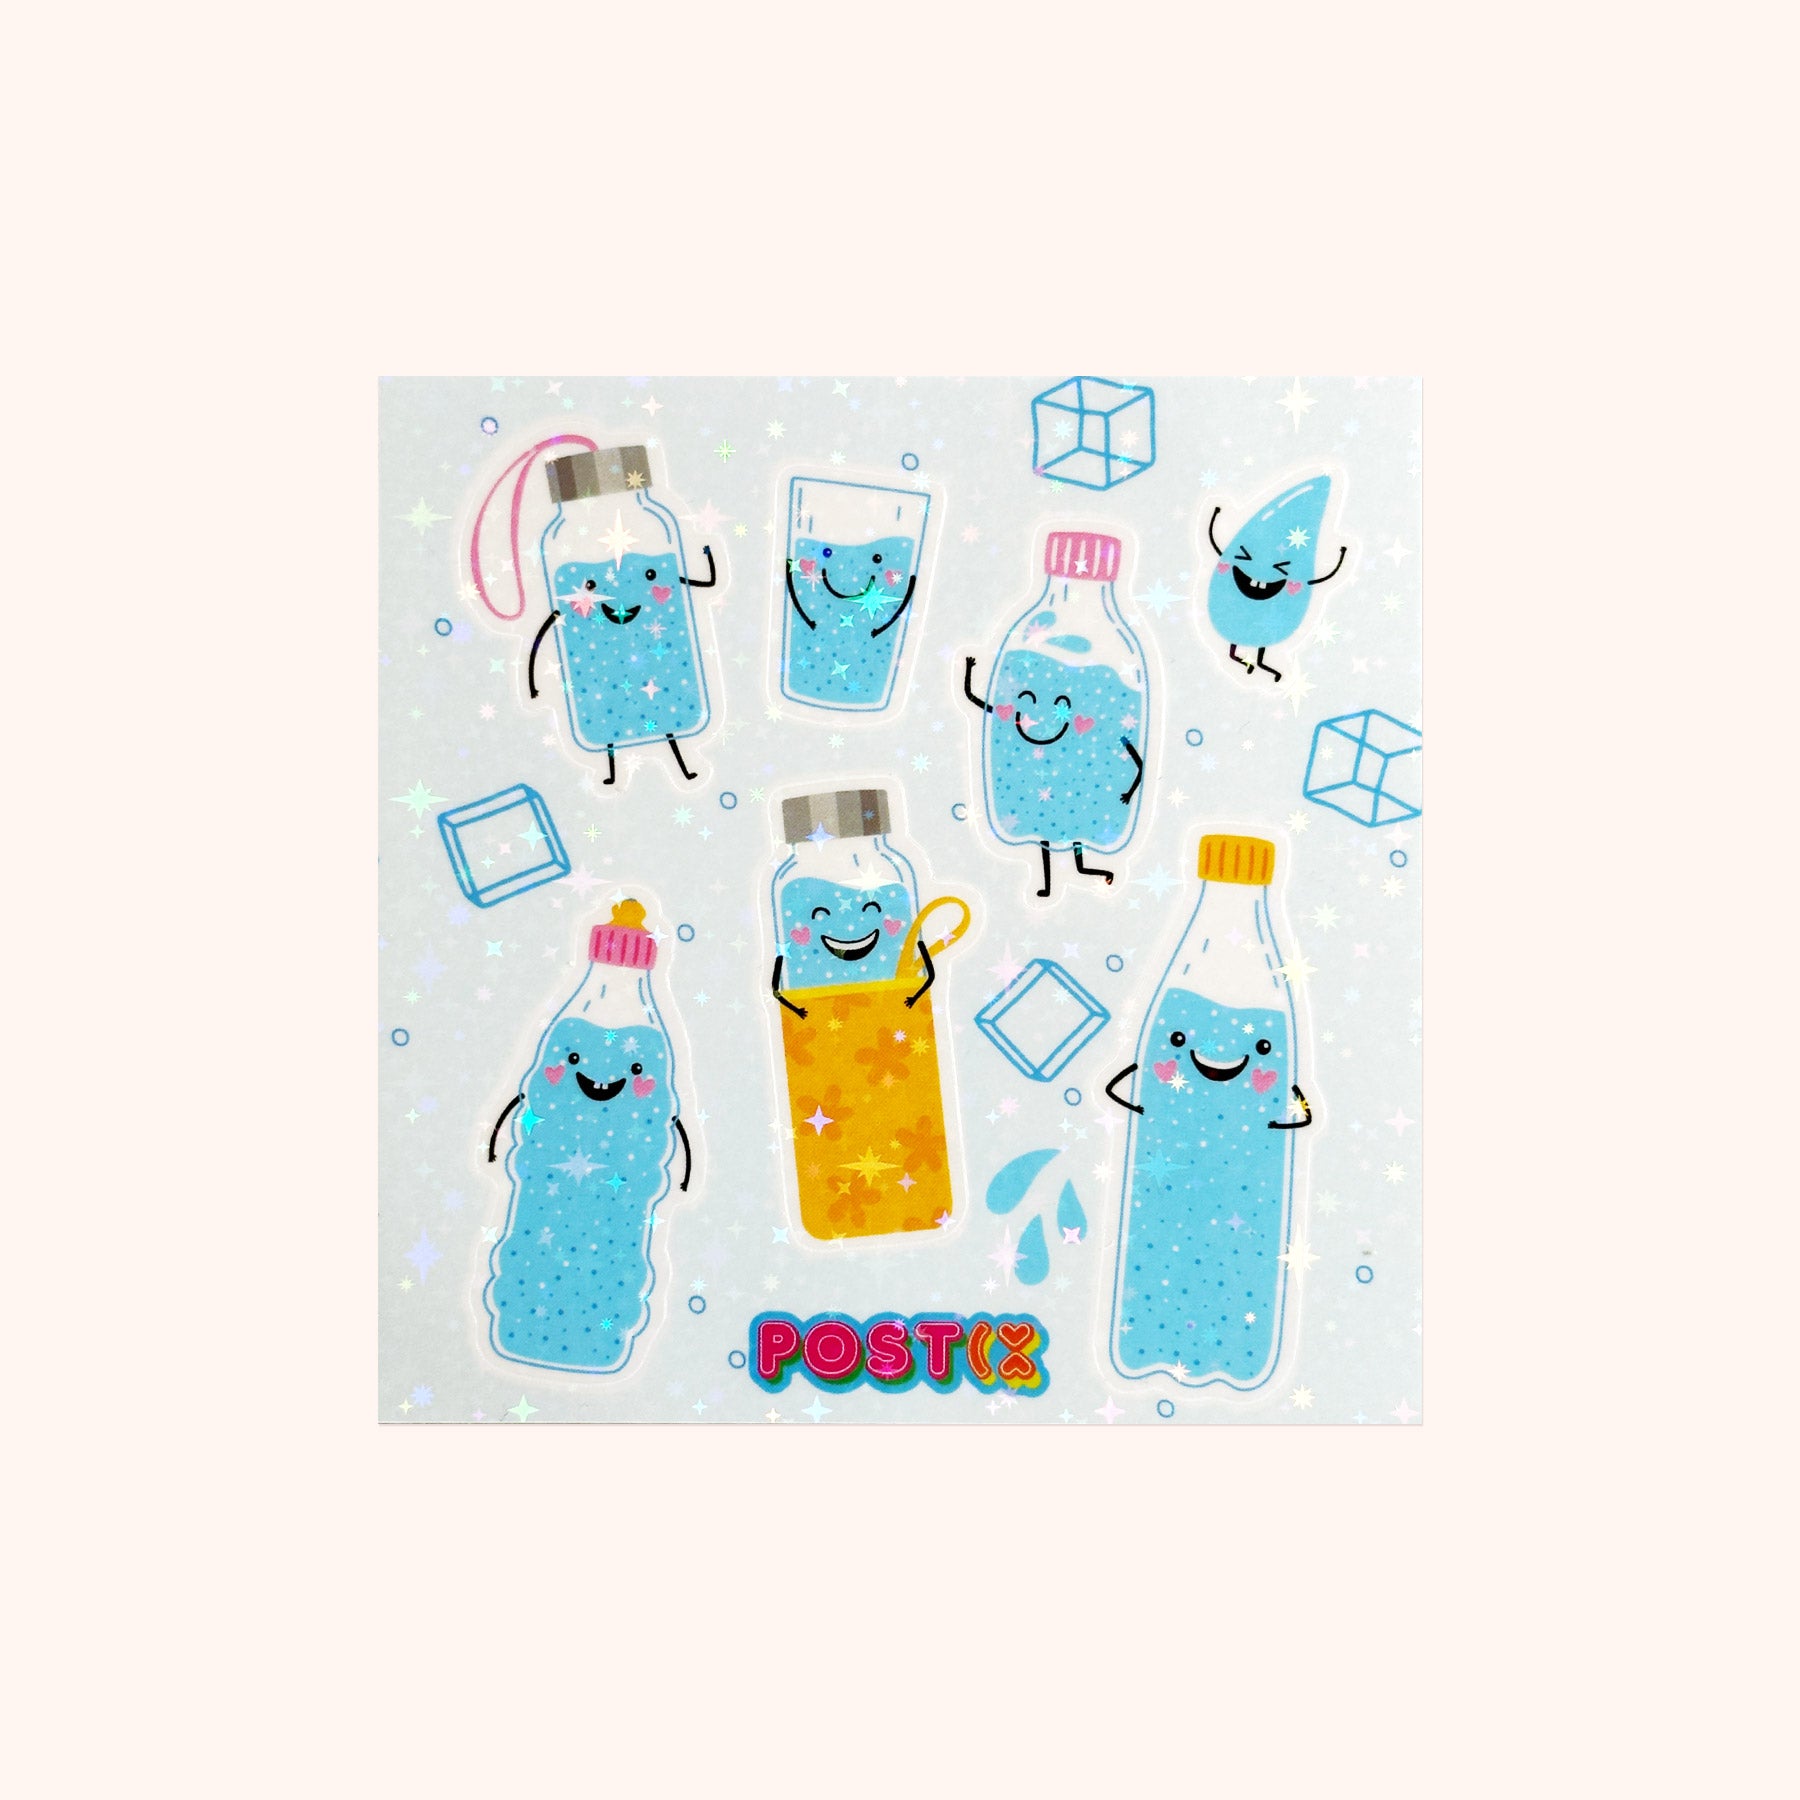 Stay Hydrated Square Hologram Sticker Sheet